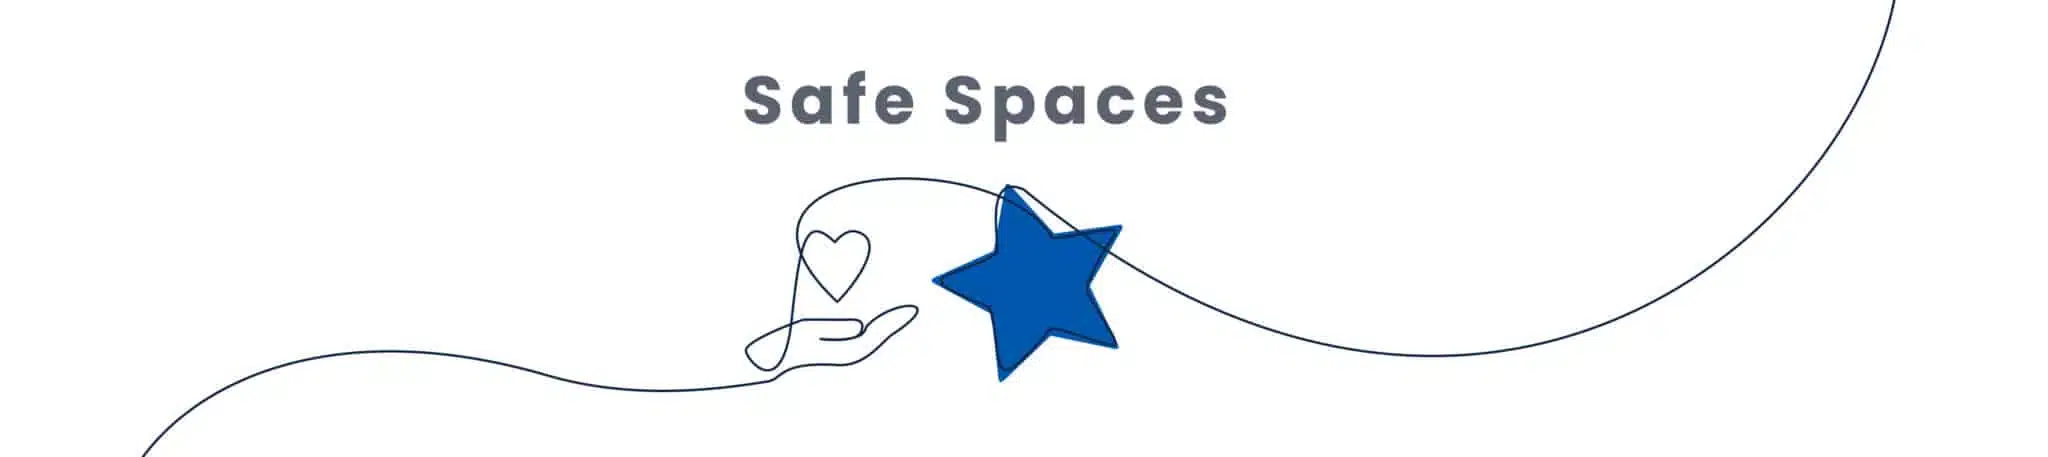 Line drawing of a hand pointing to a star, connected by a flowing line, with the text "Safe Spaces" above.